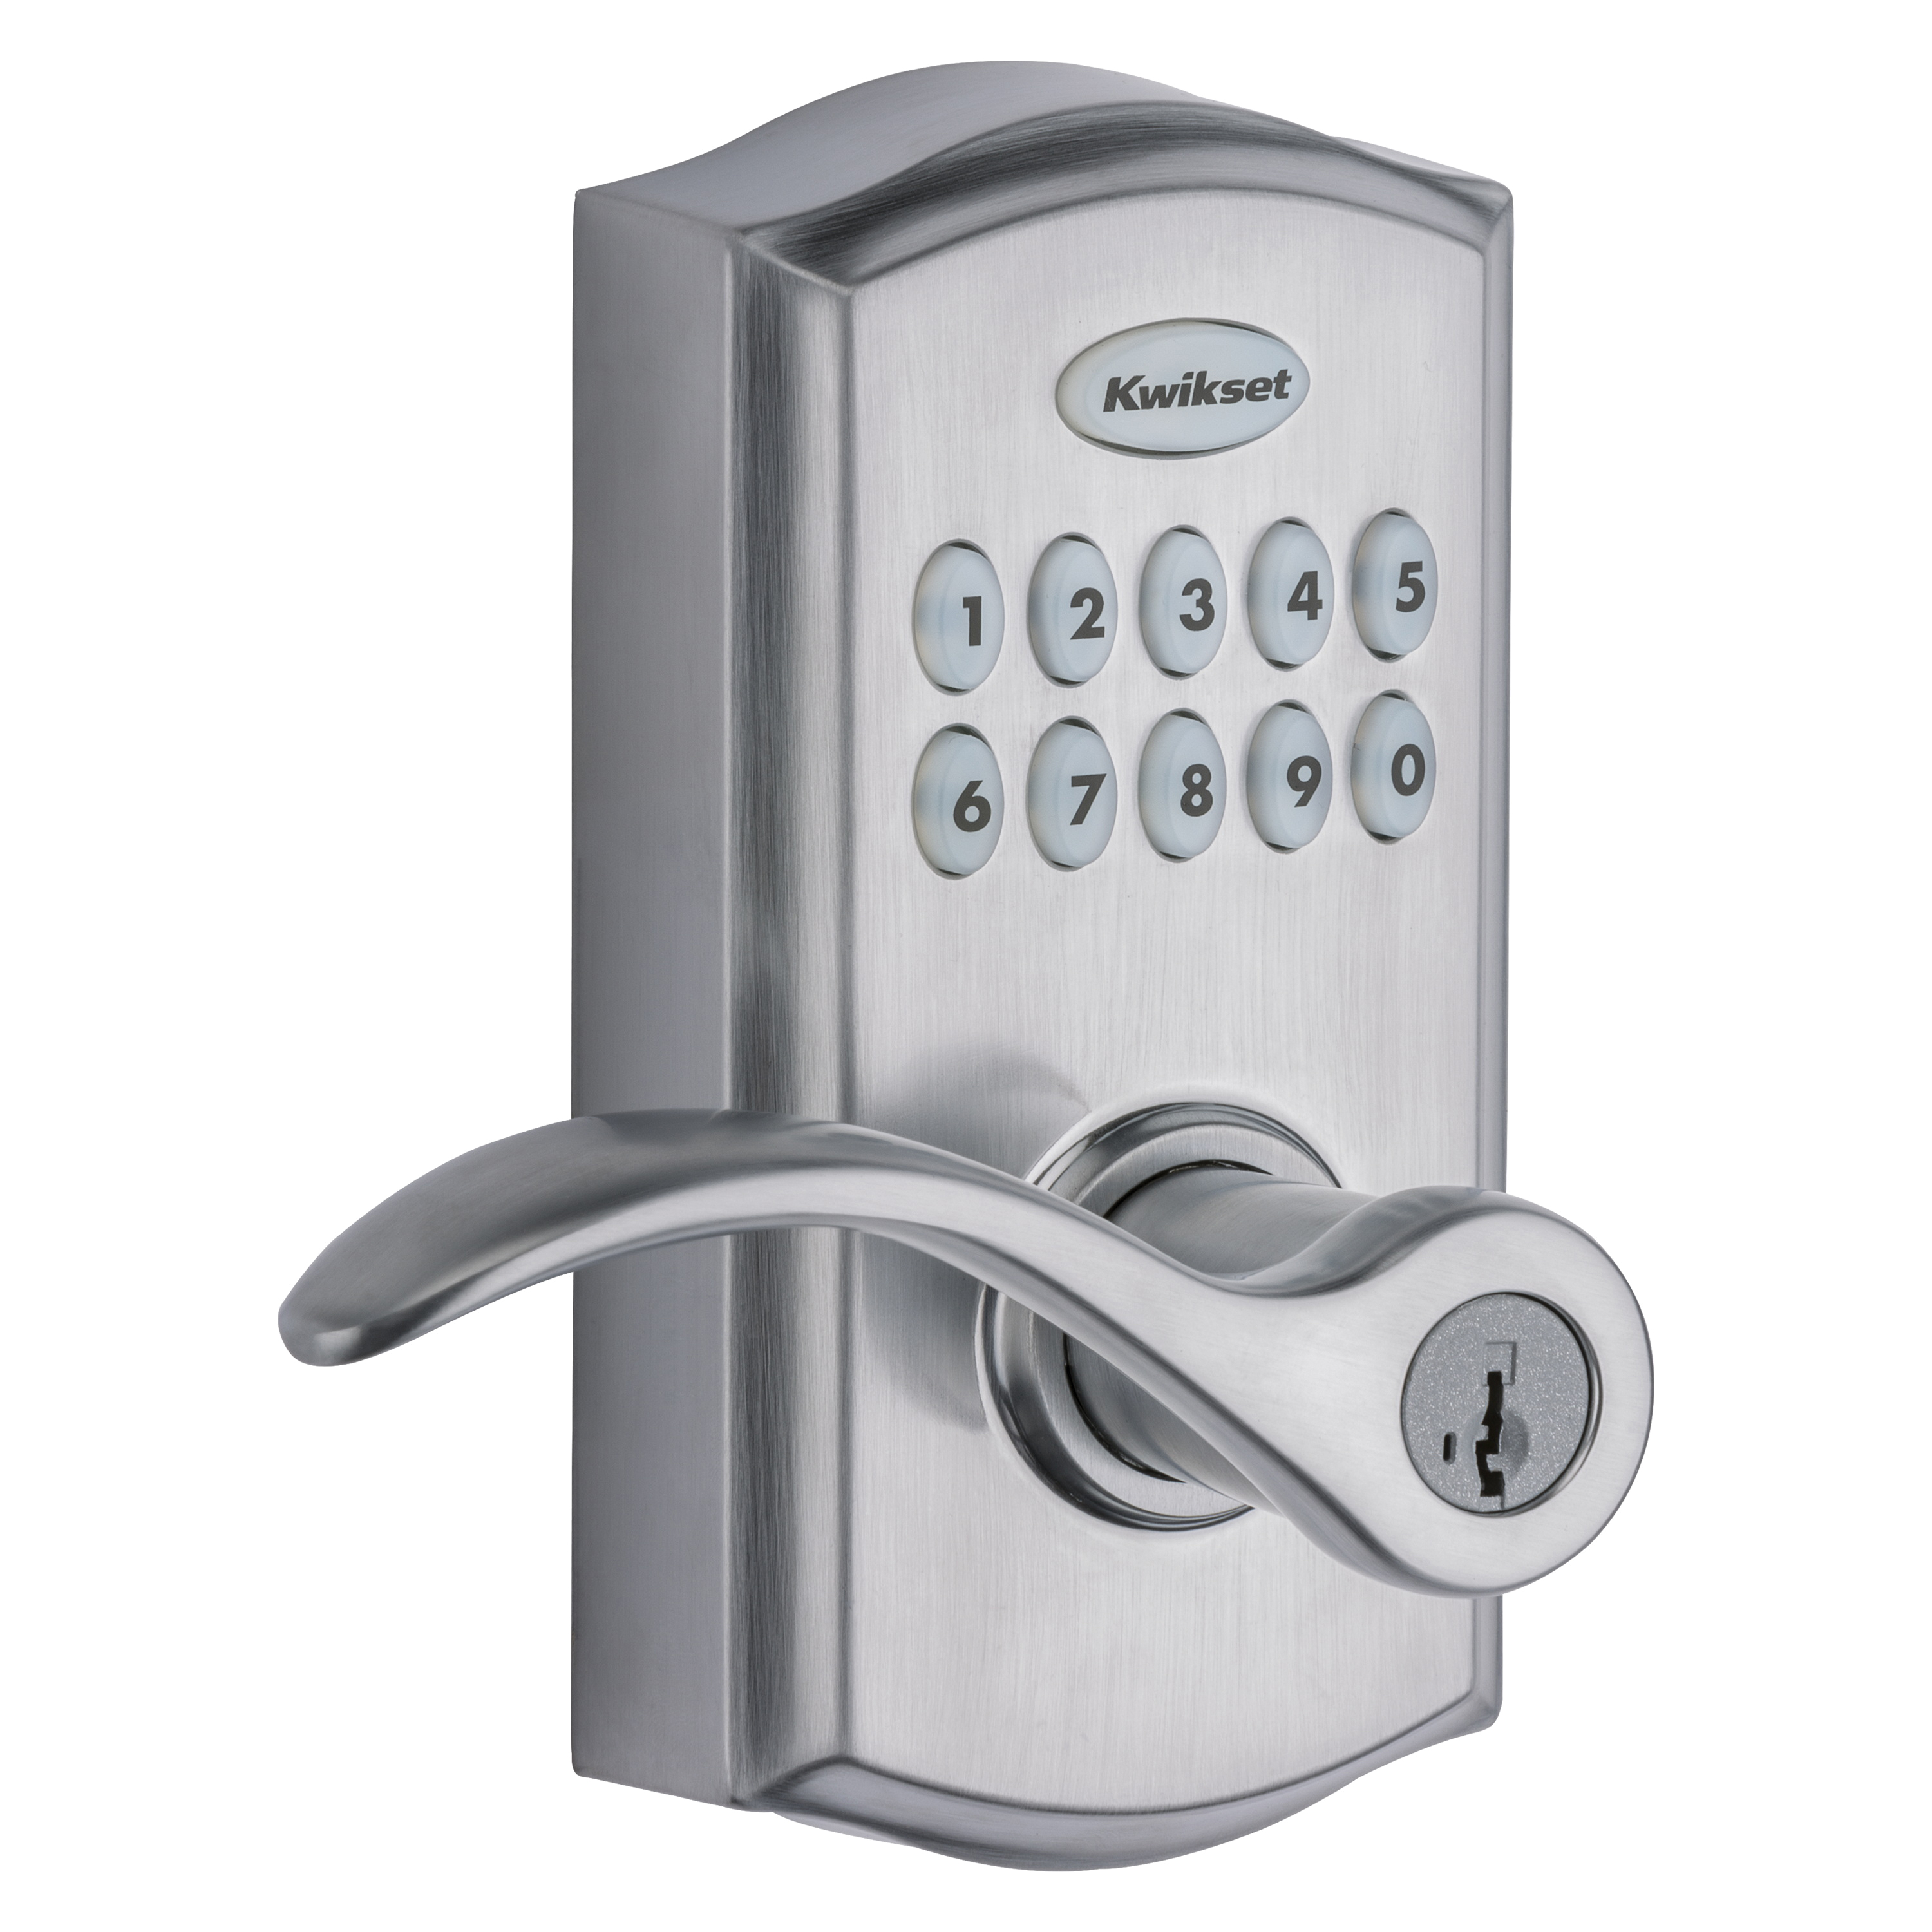 Kwikset 955PML 26D SMT CP Electronic Entry Lock, Satin Chrome, Commercial, AAA Grade, Zinc, Keypad Included